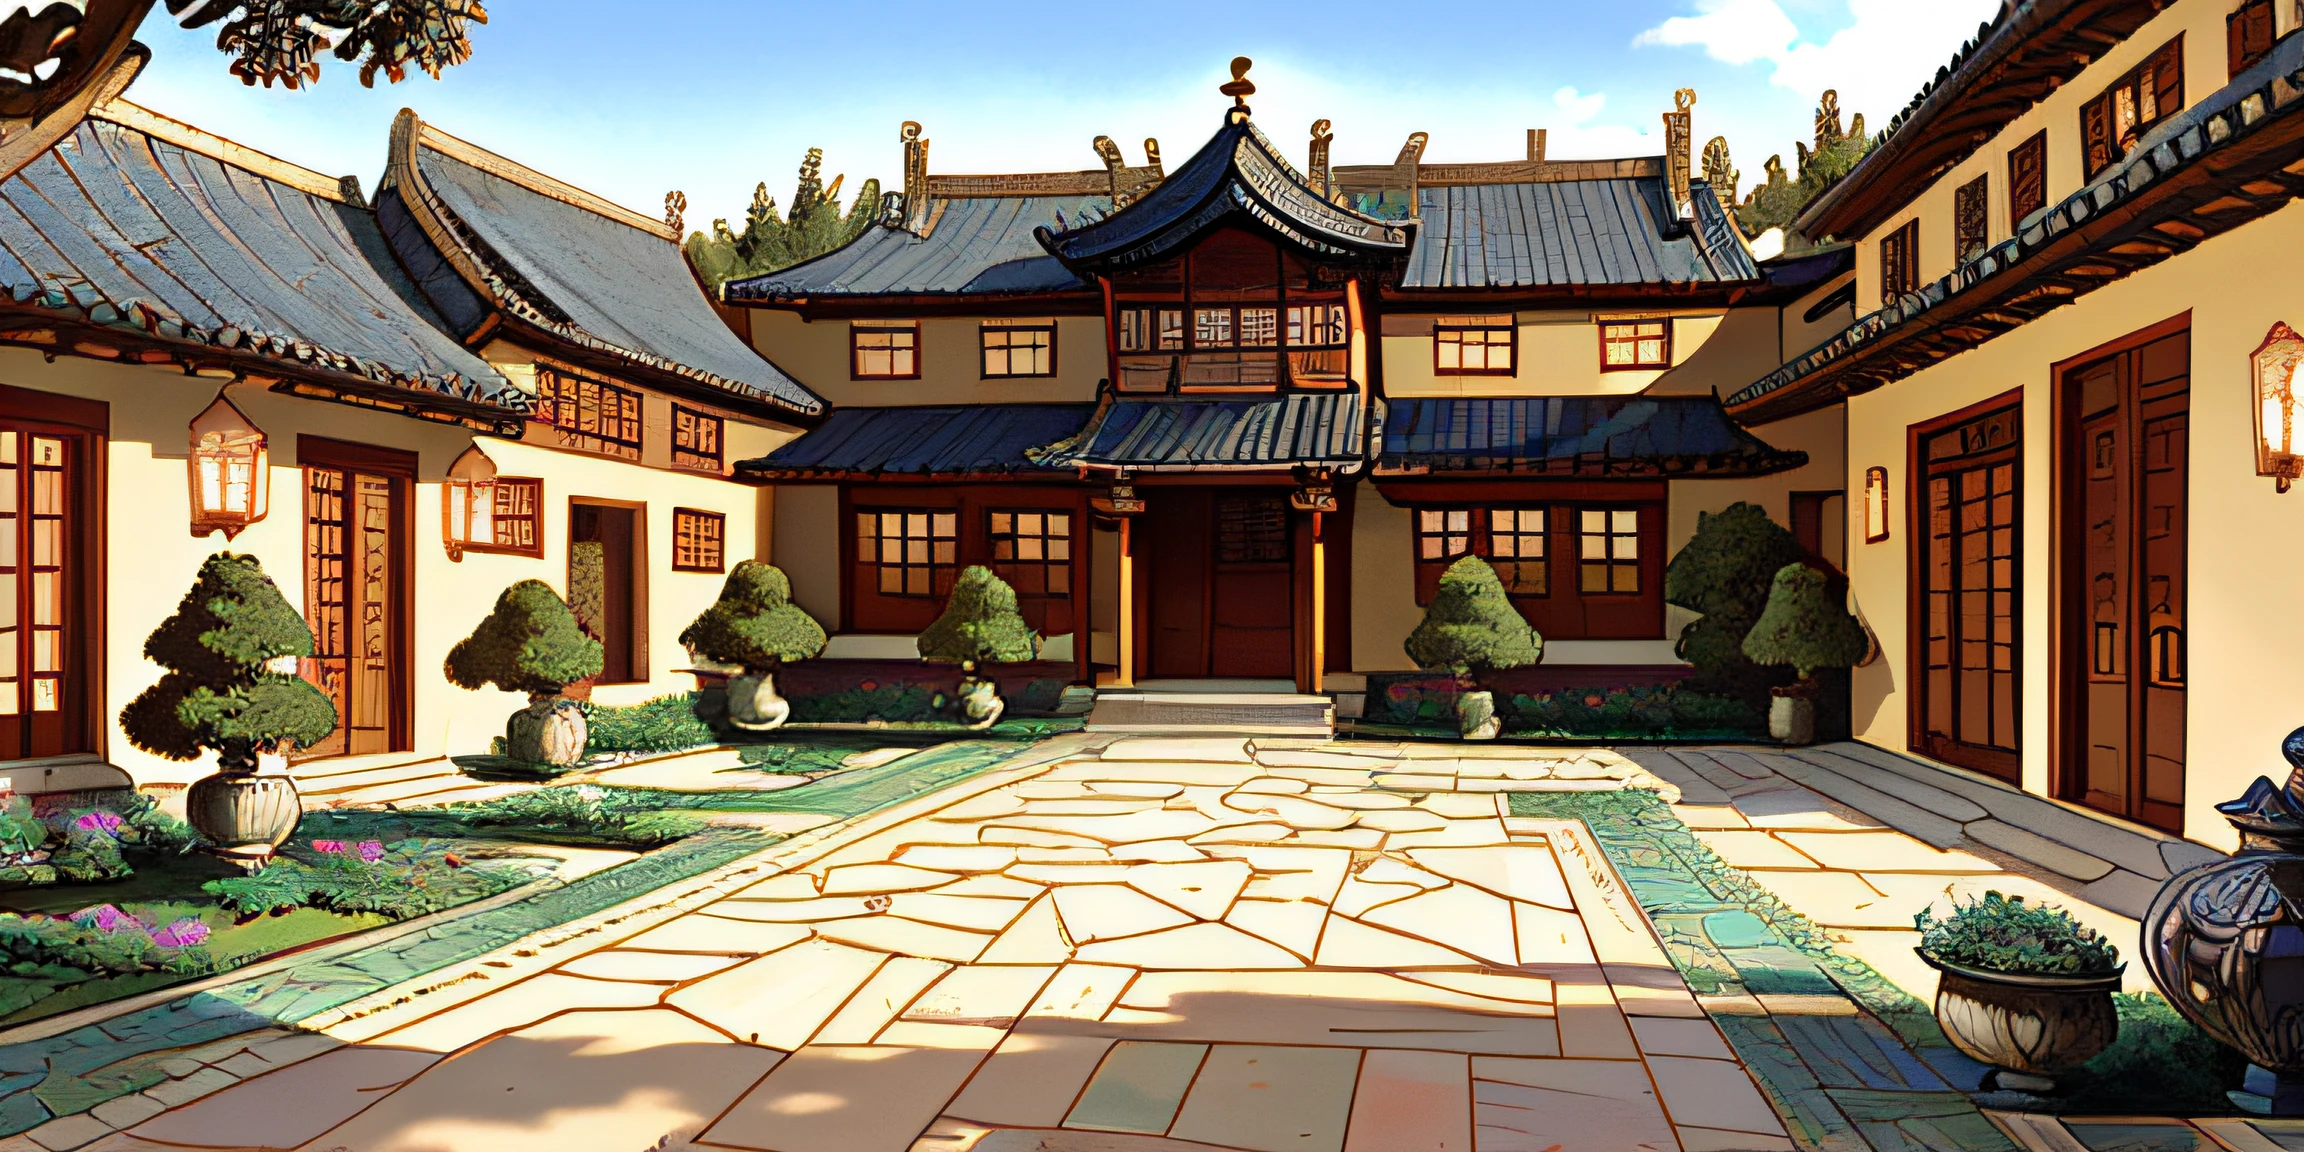 Masterpiece, the best quality, high quality, extremely detailed, a row of Chinese courtyards, the walls of the courtyard are made of bluestone or other stone, and the gates of the staff are made of wood